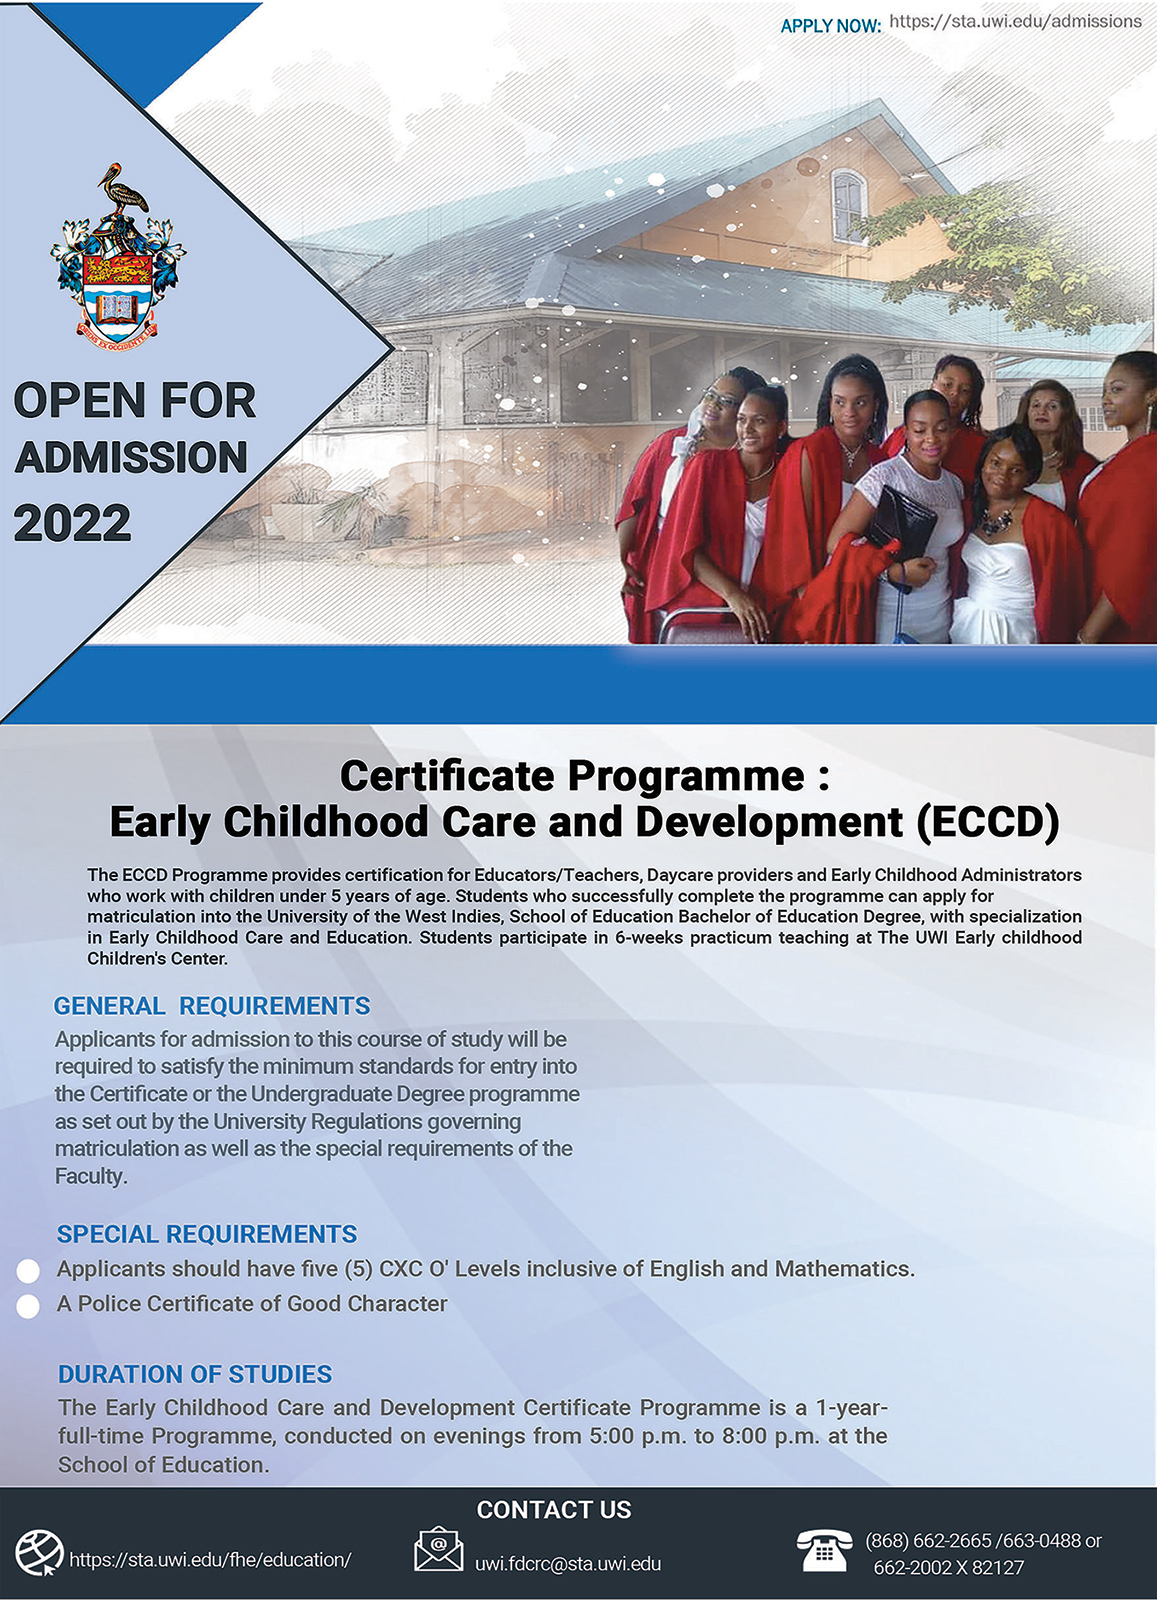 early-childhood-care-and-development-school-of-education